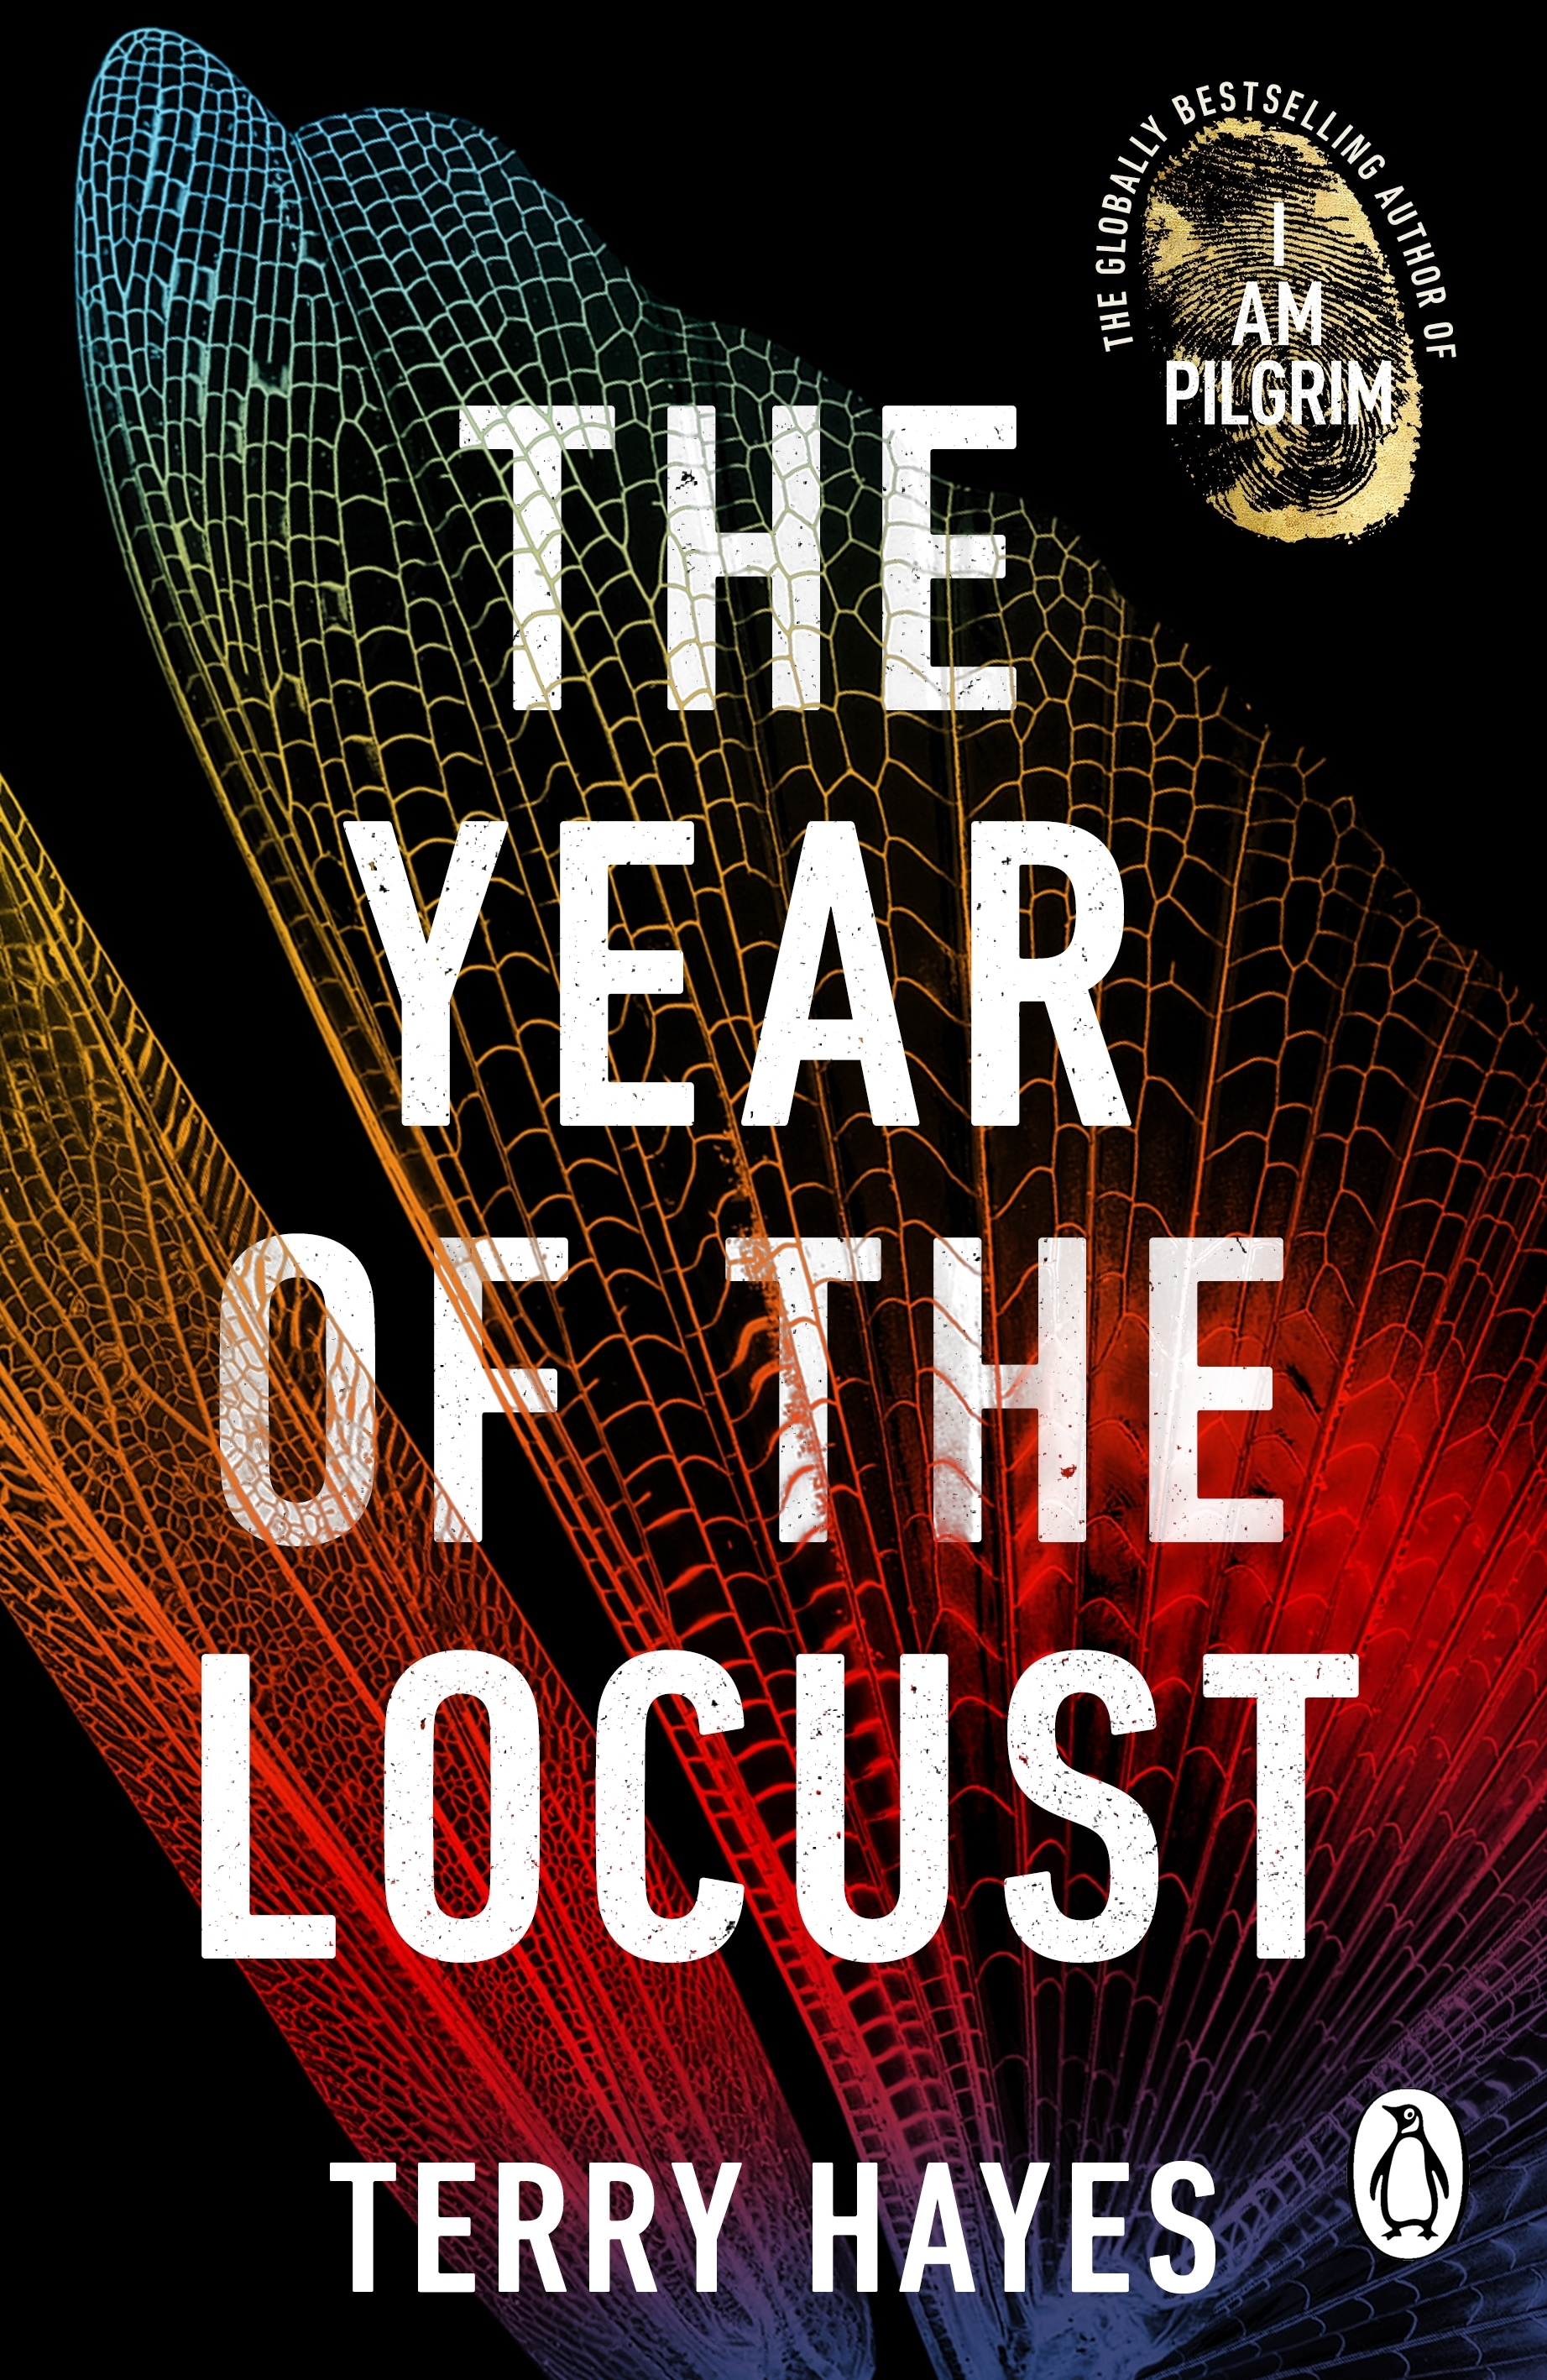 Terry Hayes: The Year of the Locust (Hardcover, Atria/Emily Bestler Books)